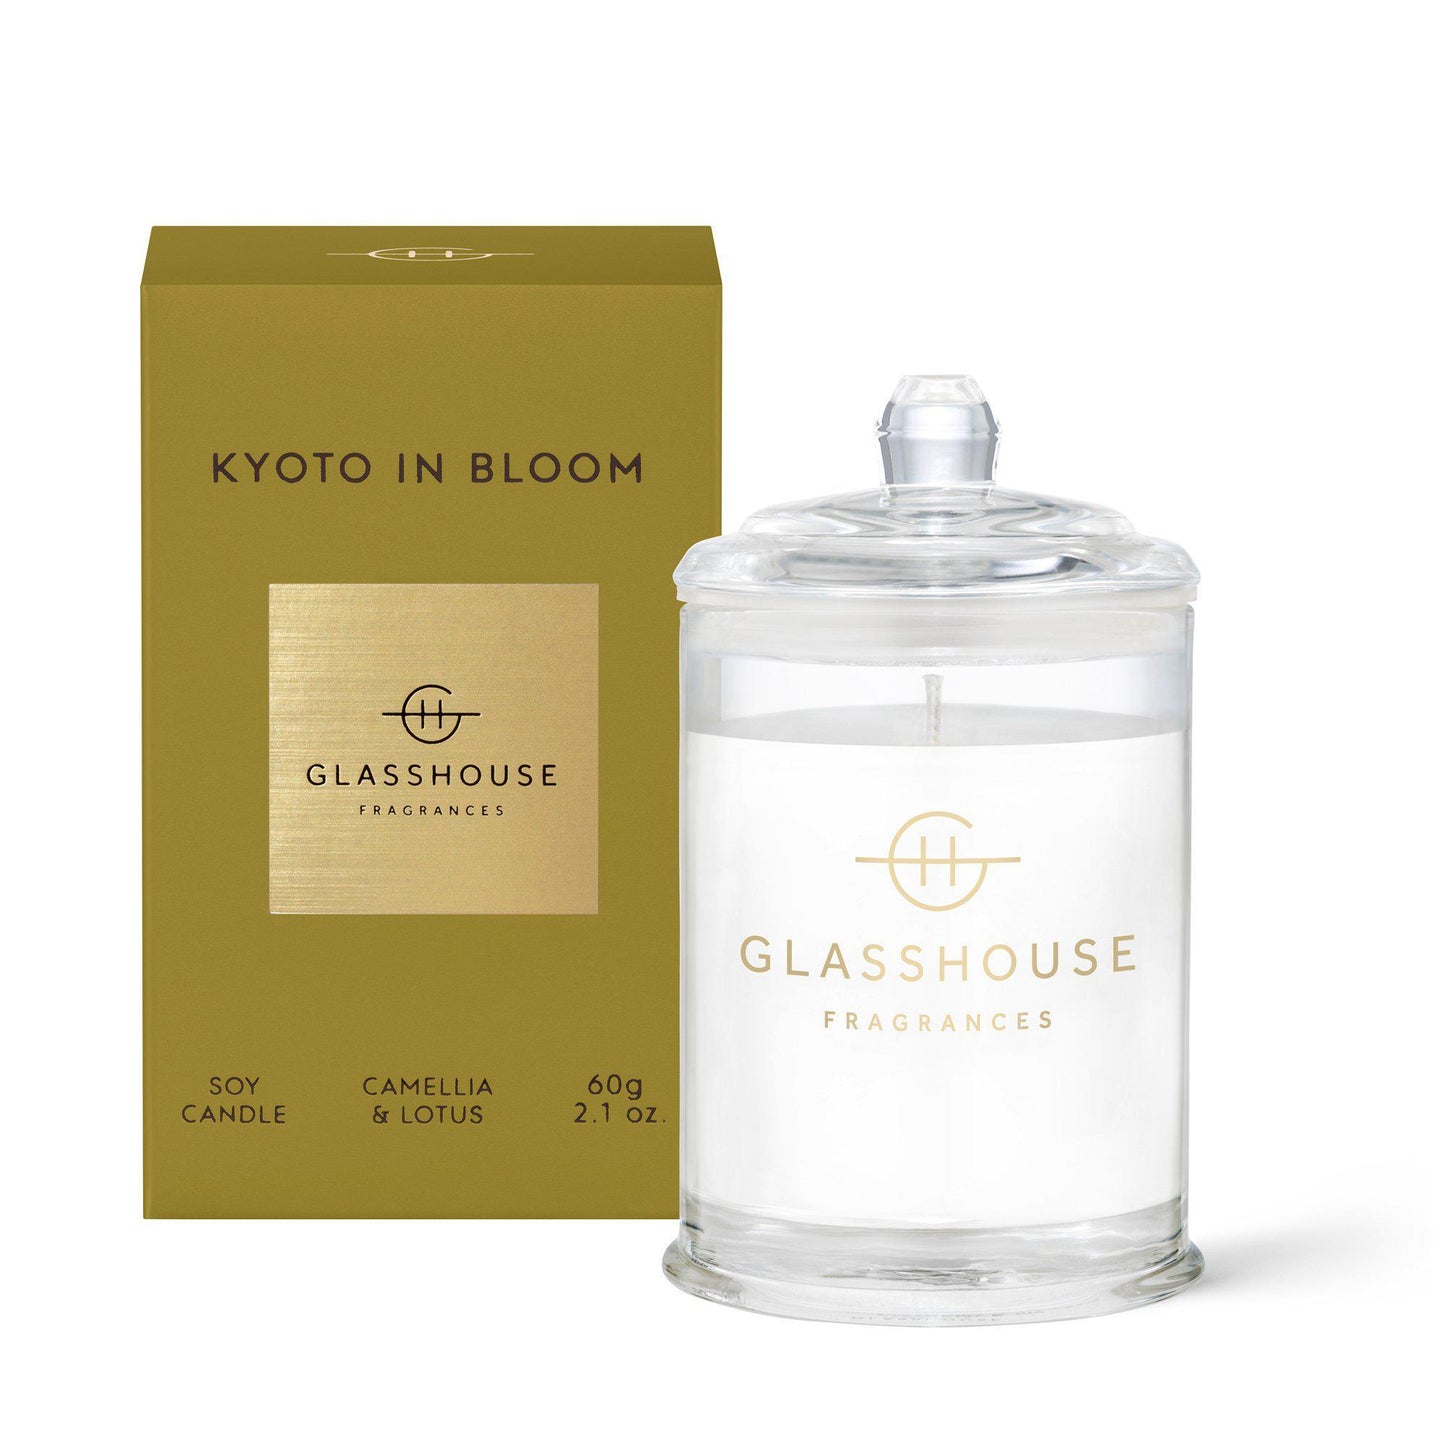 Candle 60g - Kyoto in Bloom - Glasshouse Fragrances - FUDGE Gifts Home Lifestyle